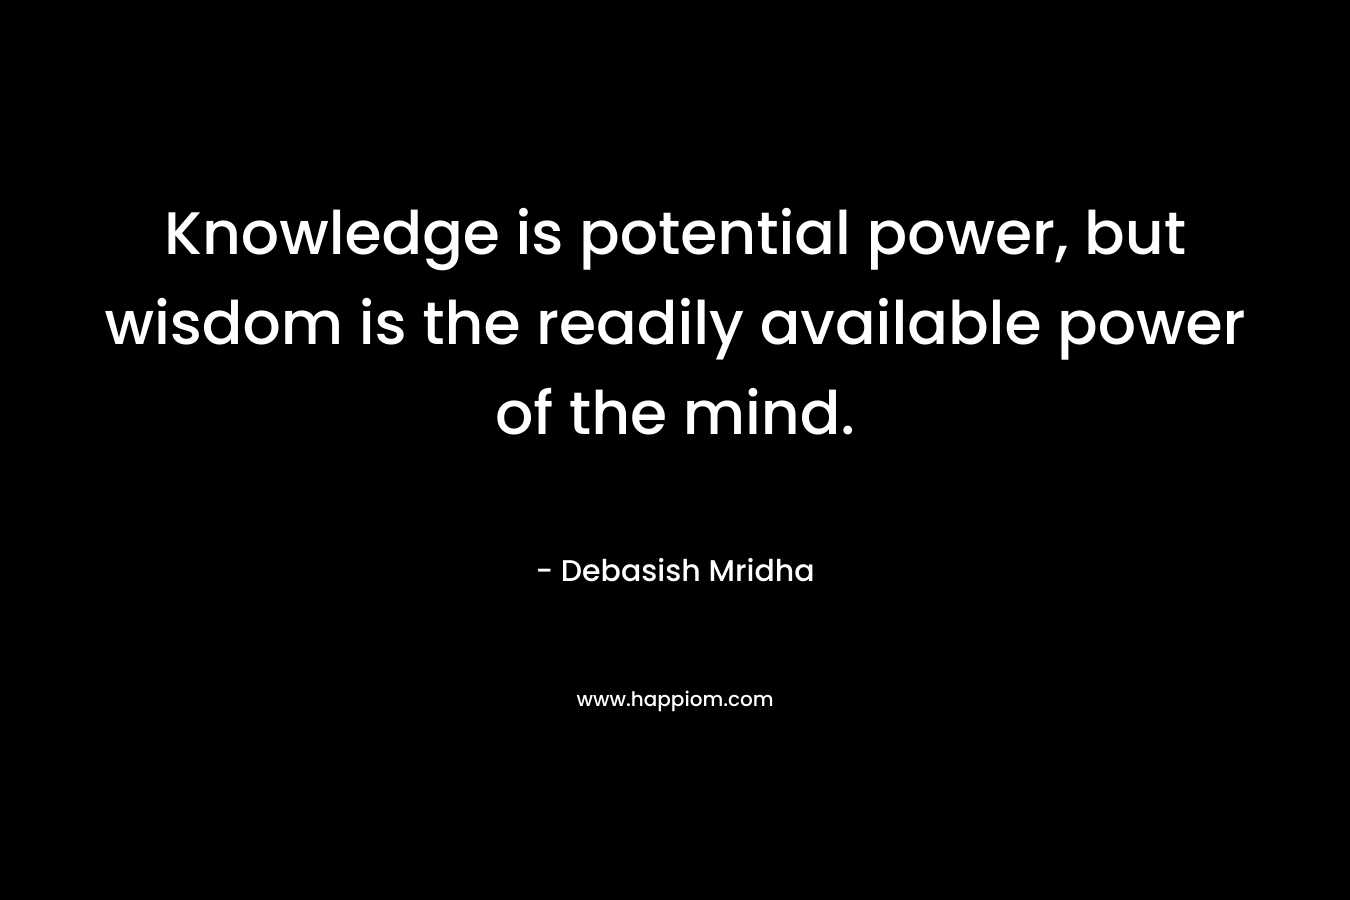 Knowledge is potential power, but wisdom is the readily available power of the mind.